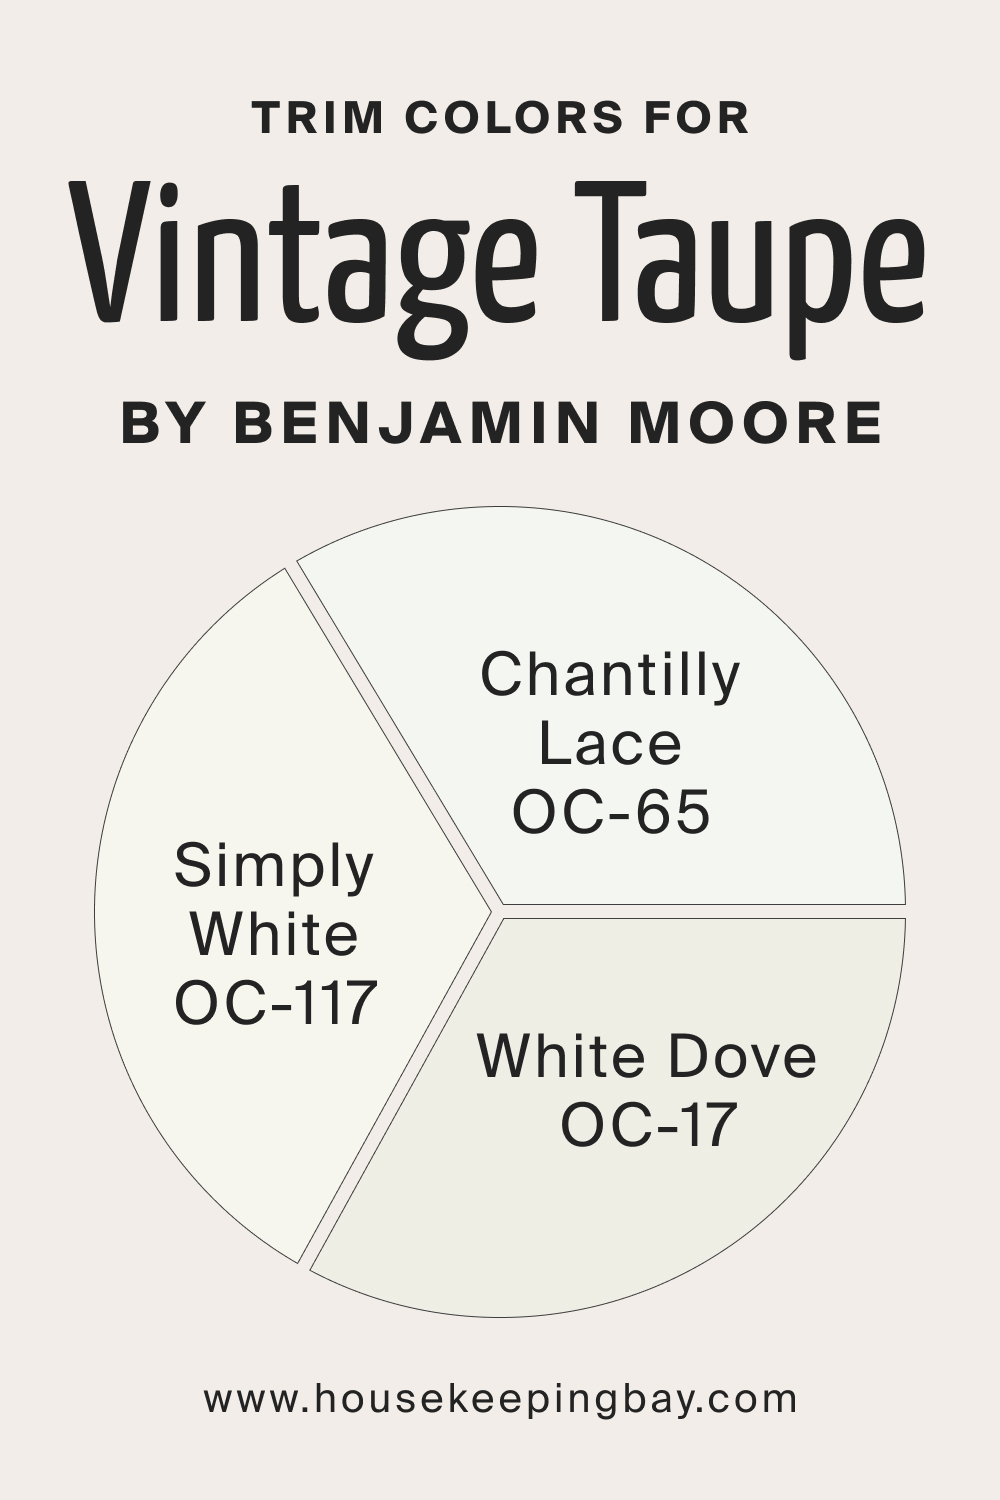 Trim Colors for Vintage Taupe 2110 70 by Benjamin Moore